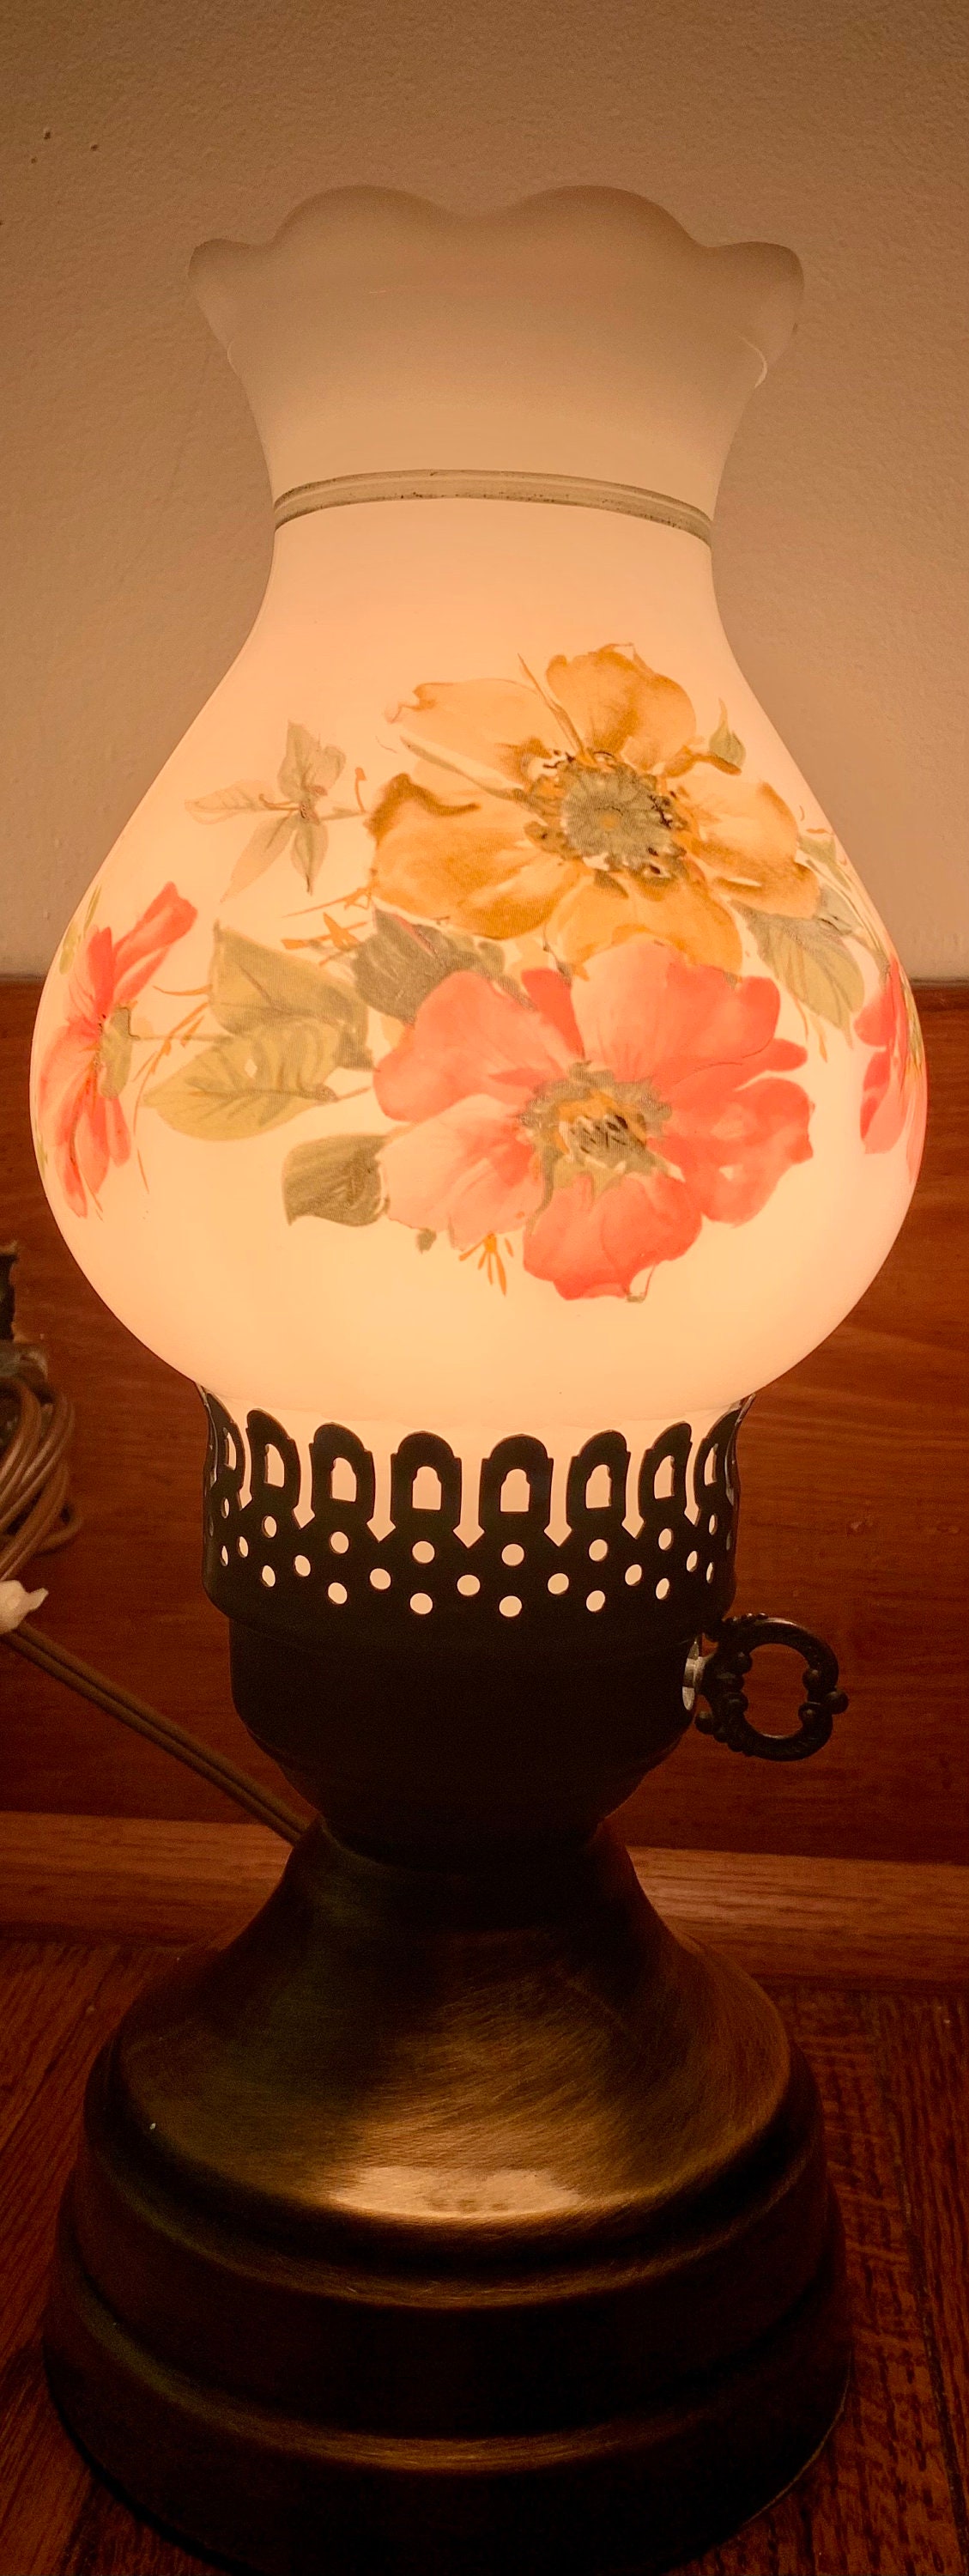 Vintage Hurricane GWTW Style Milk Glass Table Lamp Floral Roses - WORKS -  Waterfront Online